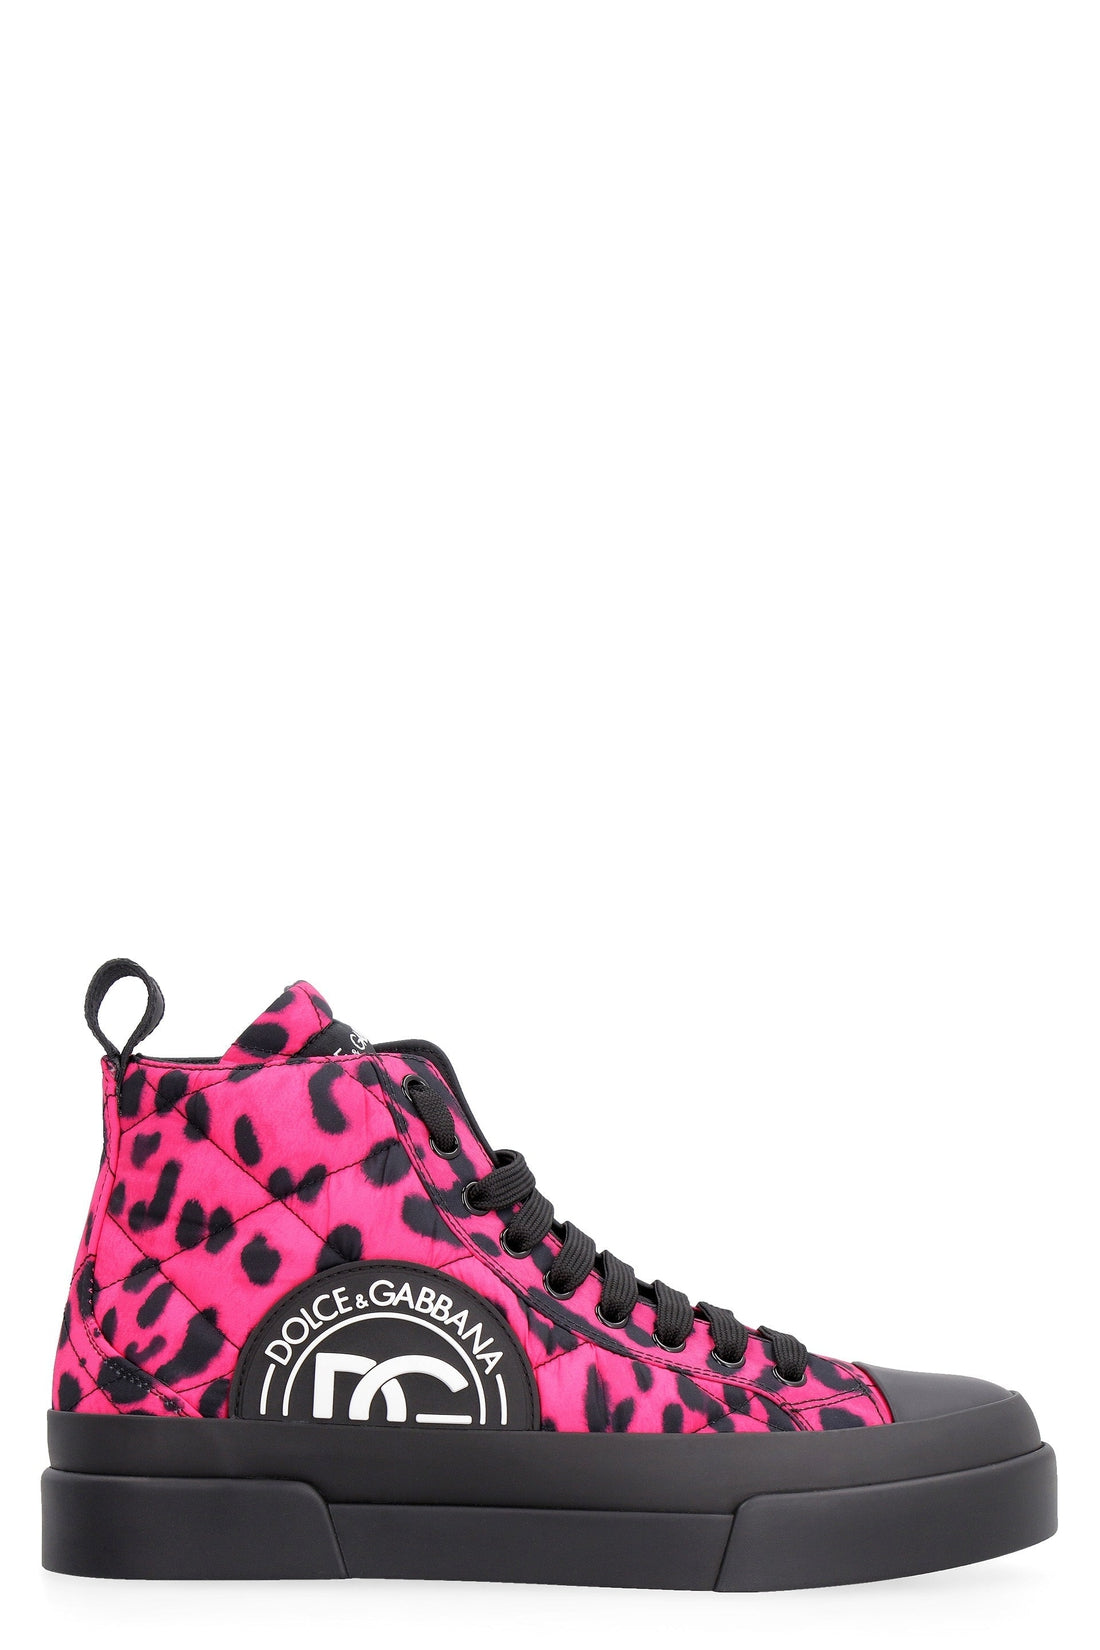 Dolce & Gabbana-OUTLET-SALE-Canvas high-top sneakers-ARCHIVIST